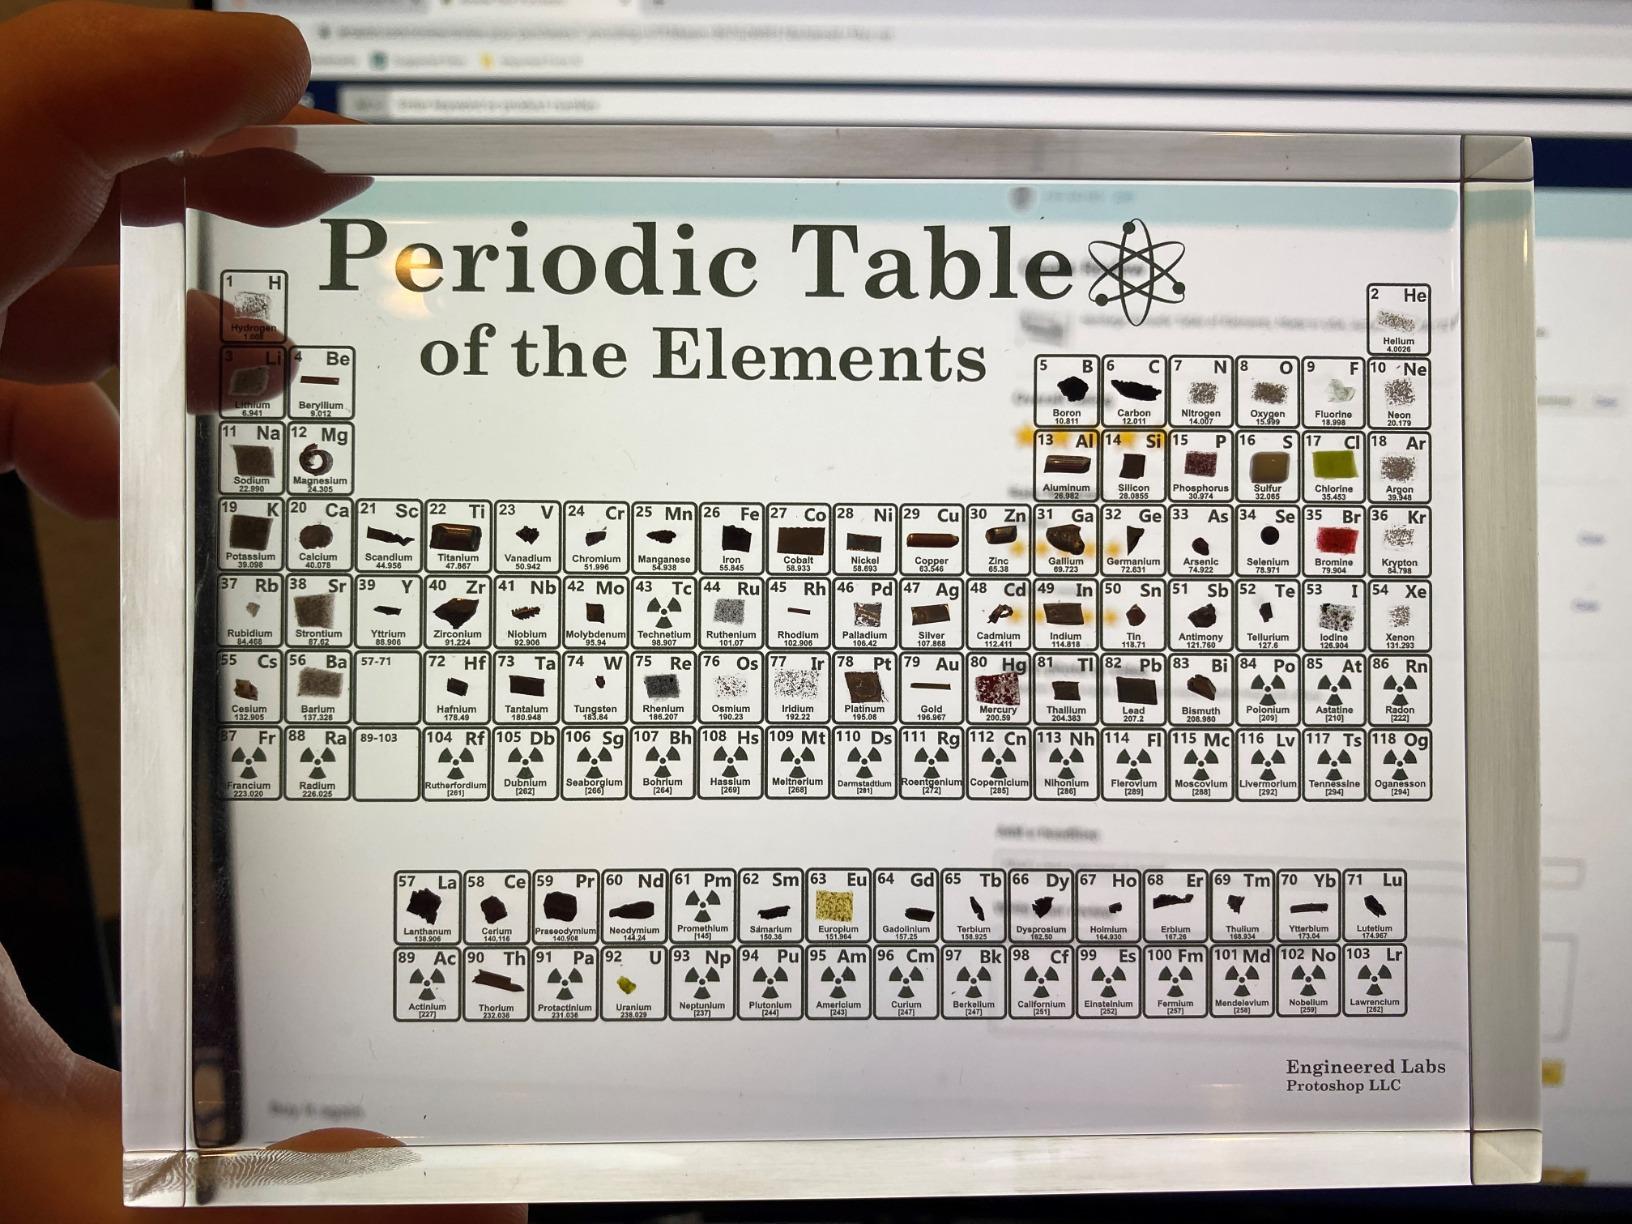 Periodic Table Display With Real Elements photo review